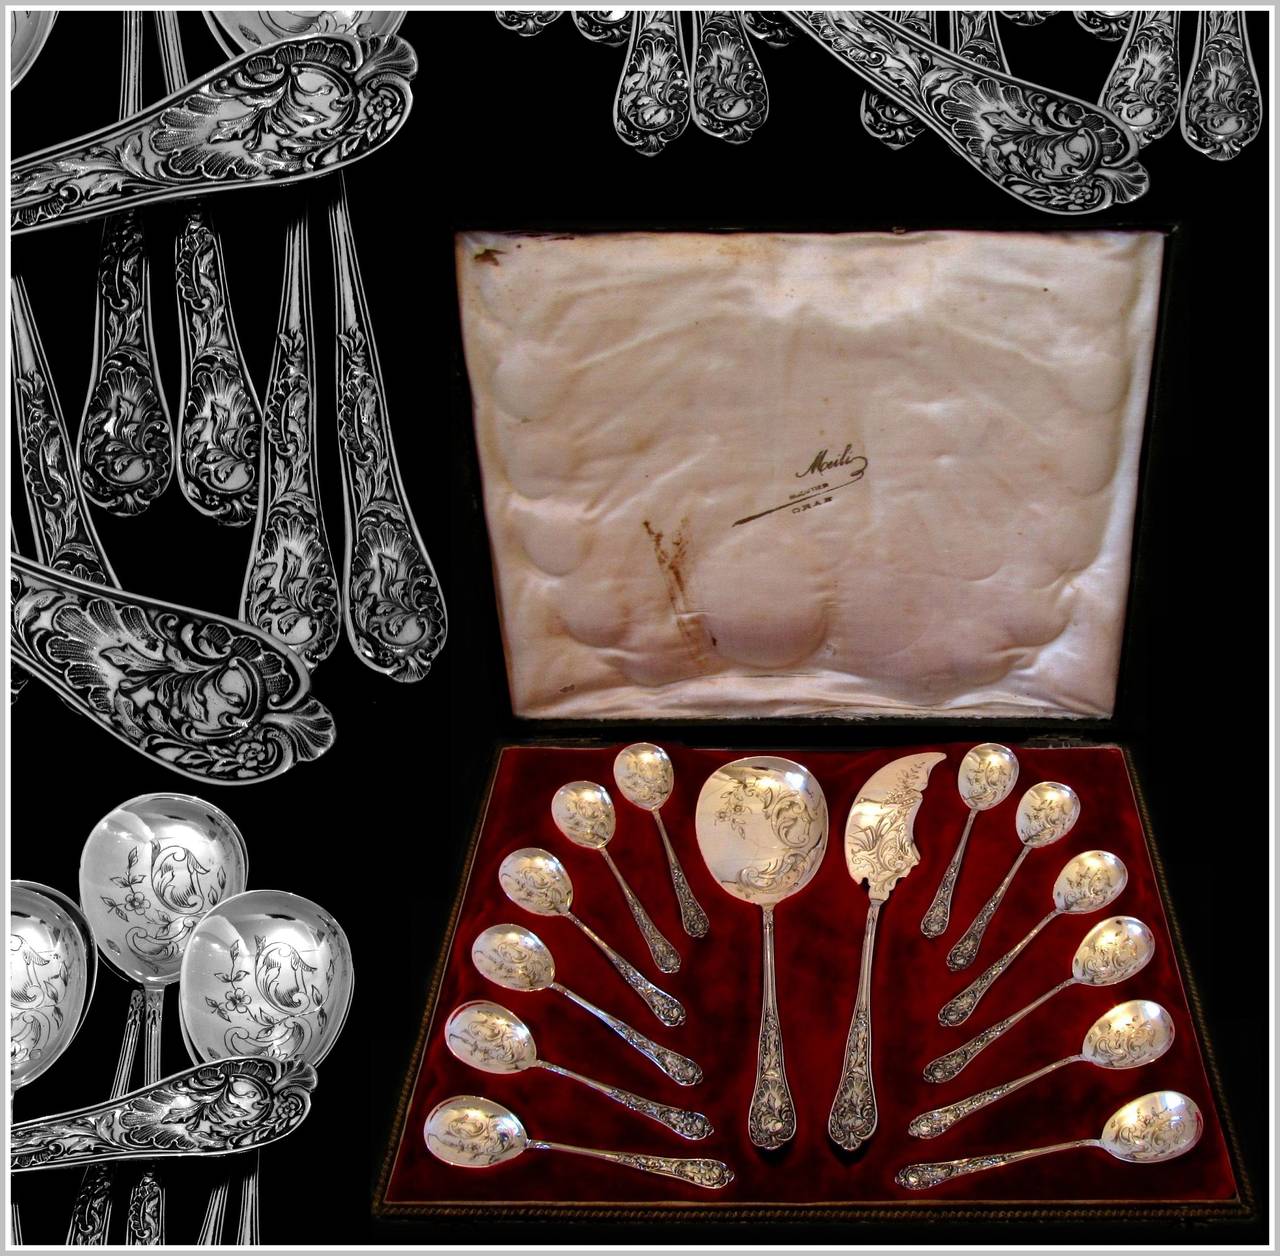 Bonnescoeur French All Sterling Silver Ice Cream Set 14 pc with Box Rococo

Head of Minerve 2nd titre for 800/1000 French Sterling Silver guarantee

A set of truly exceptional quality, for the richness of its decoration, its form and sculpting.